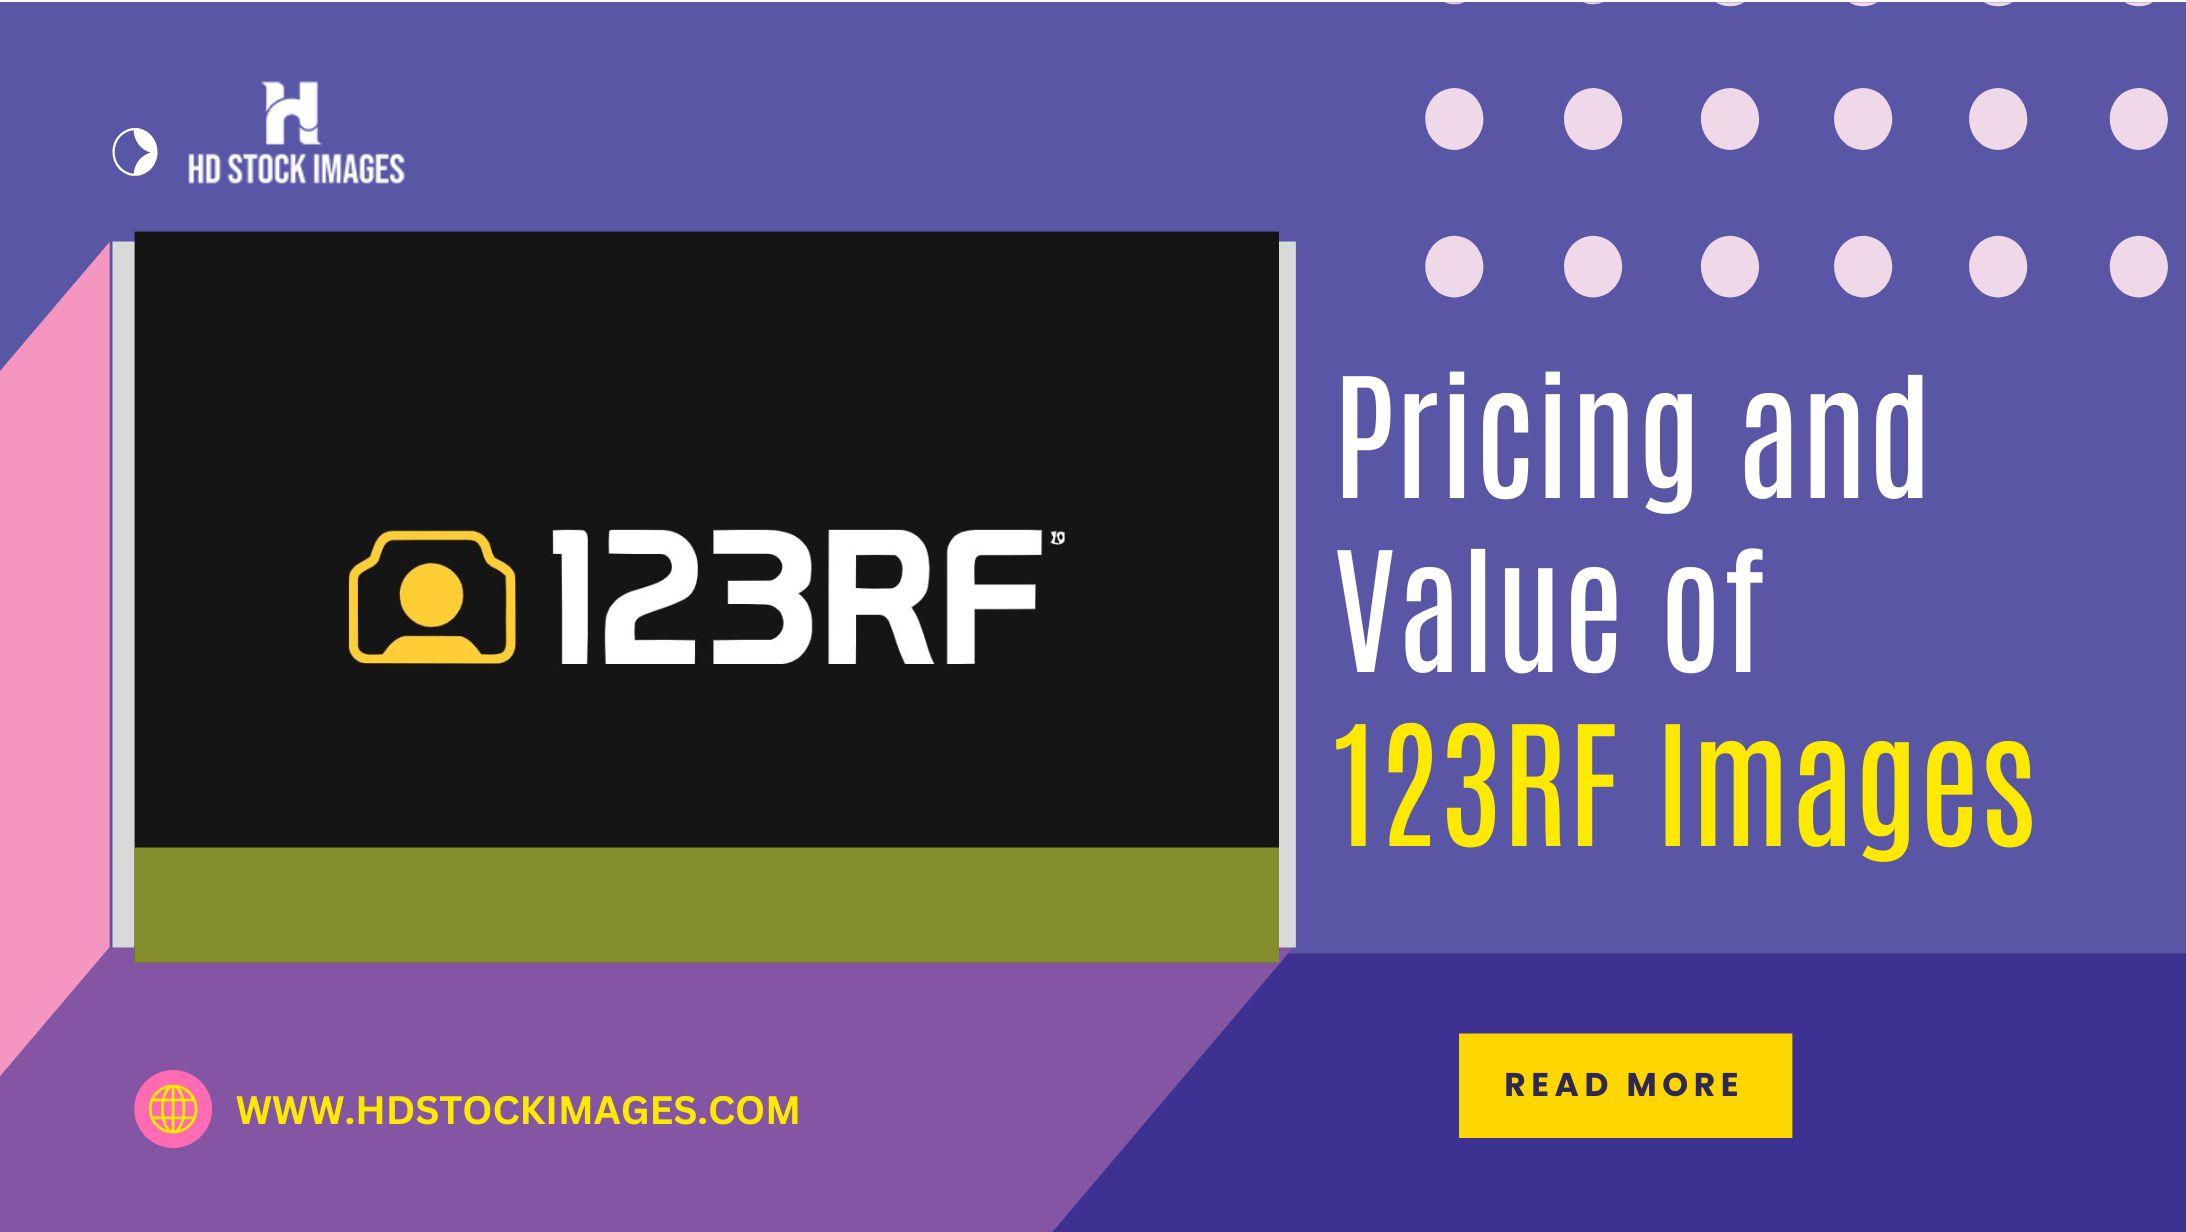 an image of Understanding the Factors Behind the Pricing and Value of 123RF Images